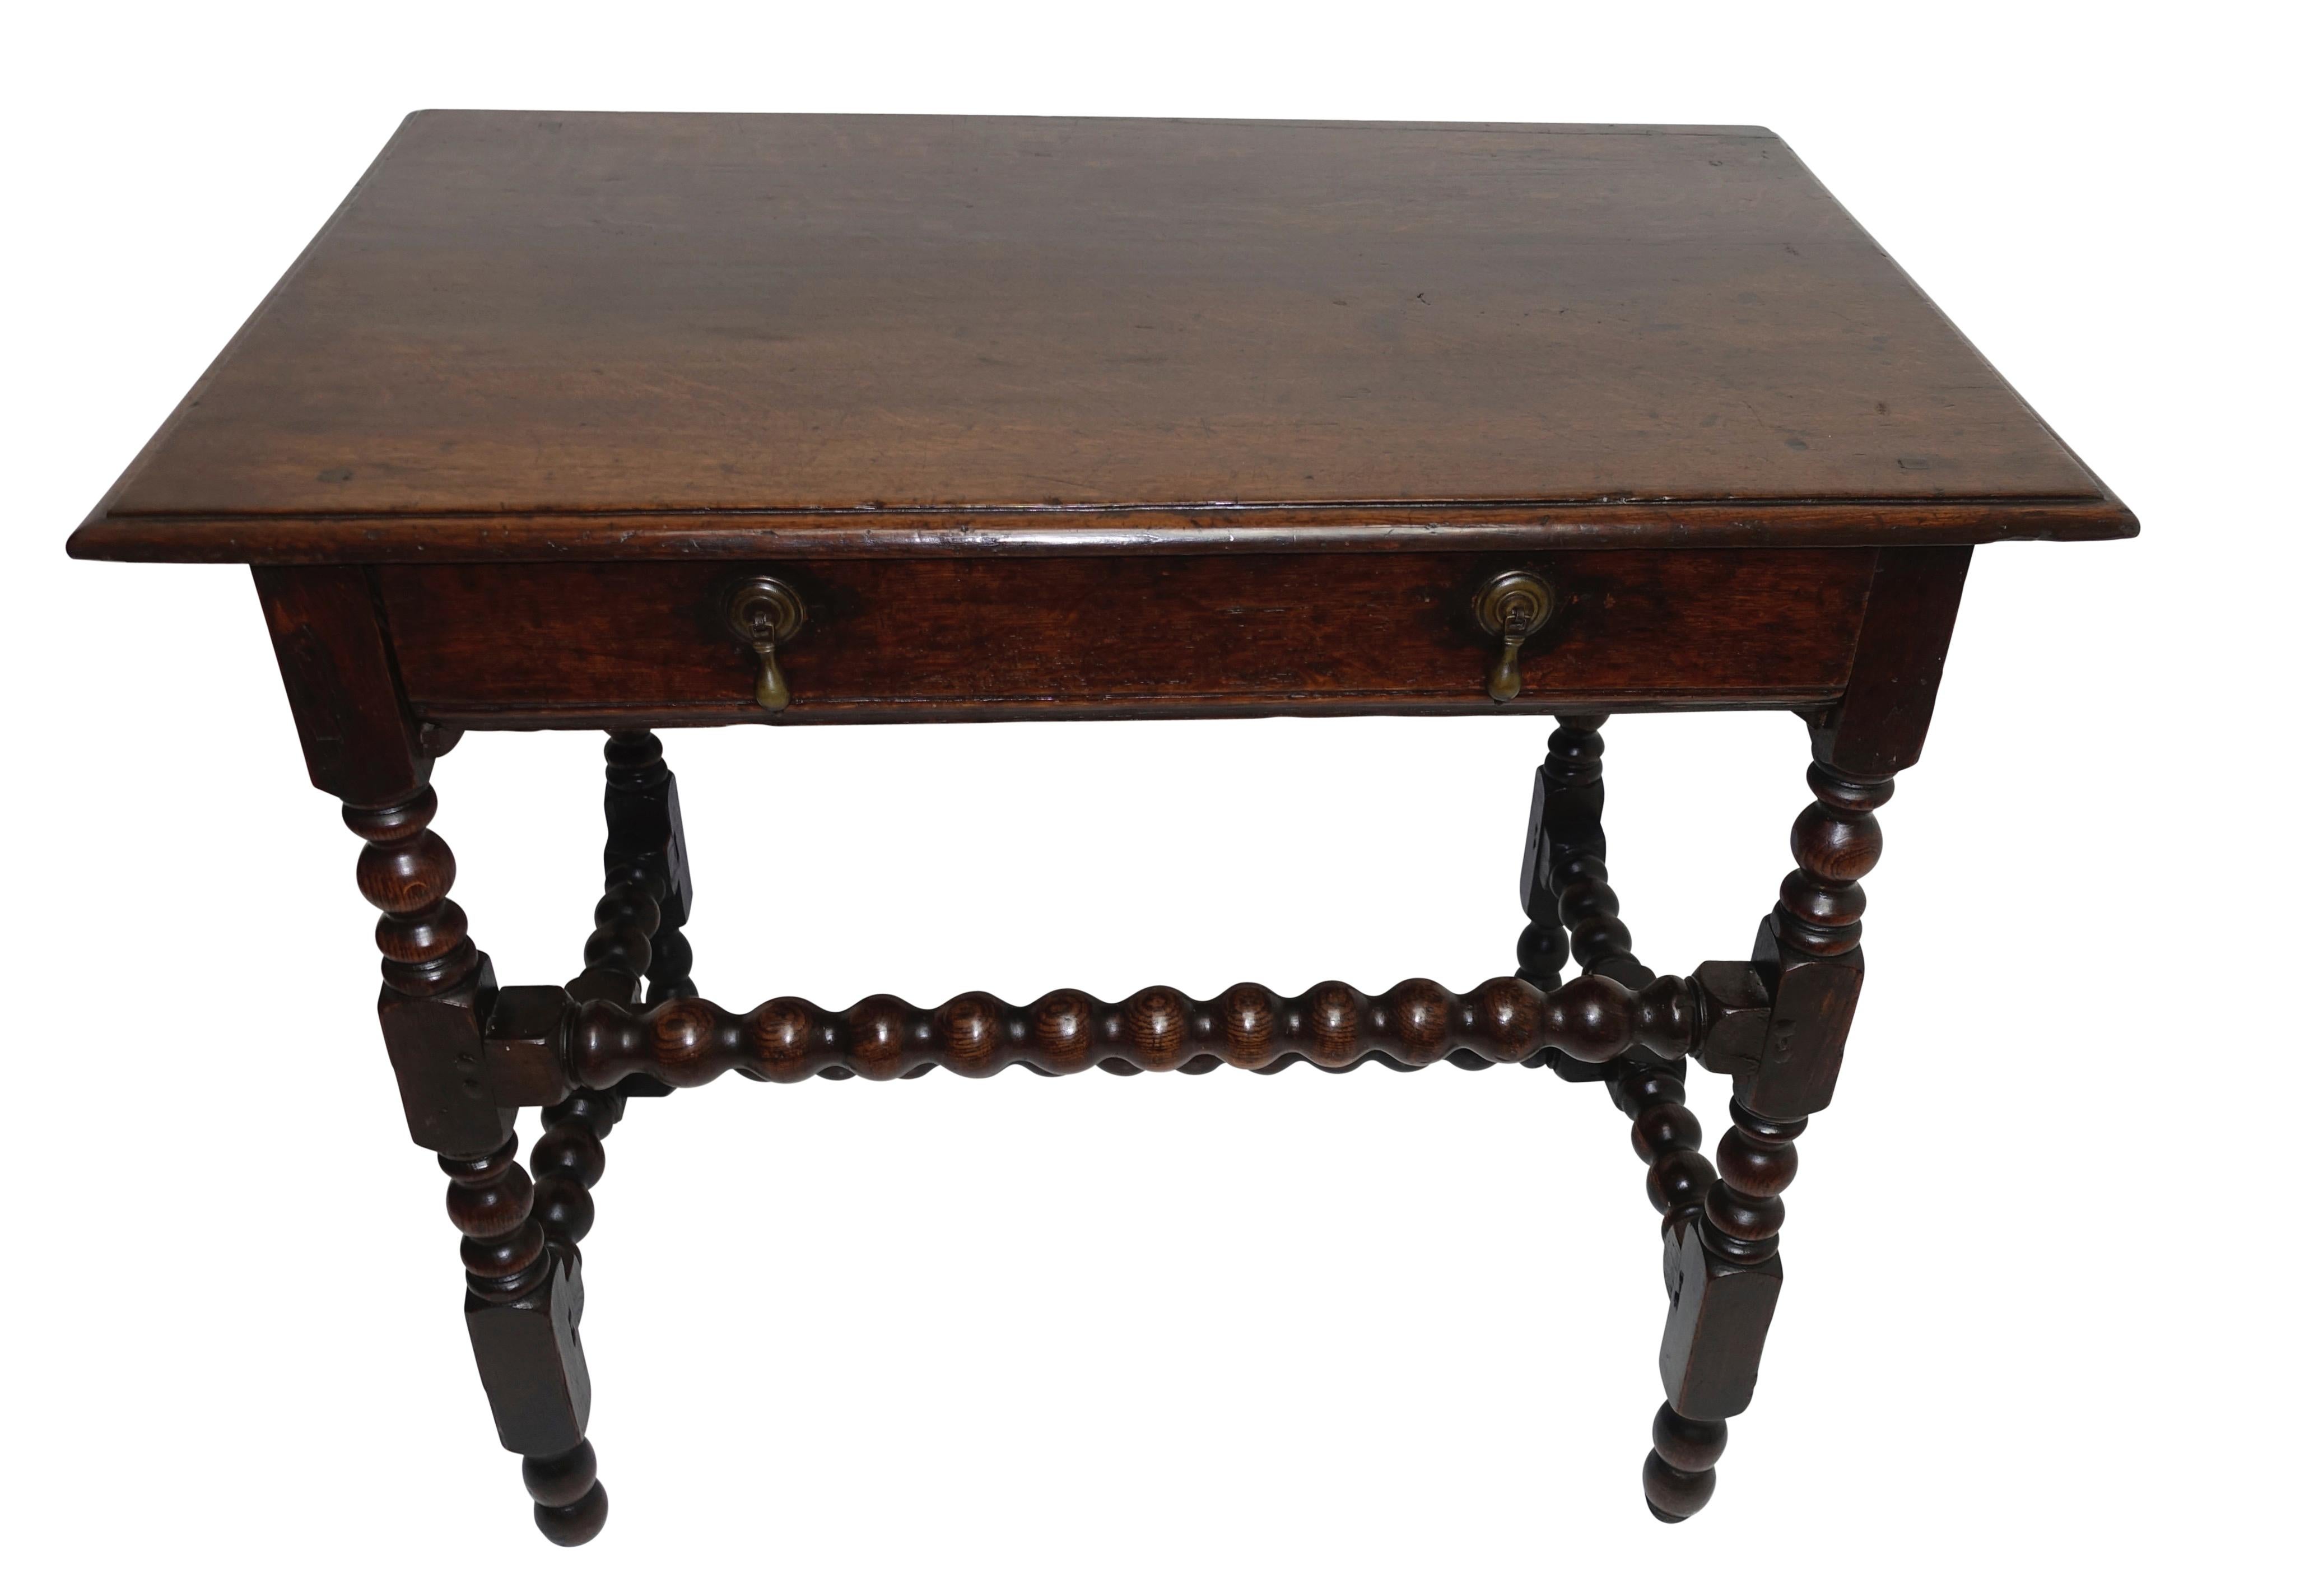 Oak side table or writing desk with a single drawer, having hand-carved turned legs and spool turned stretcher bars and with original hardware. England, late 17th to early 18th century.